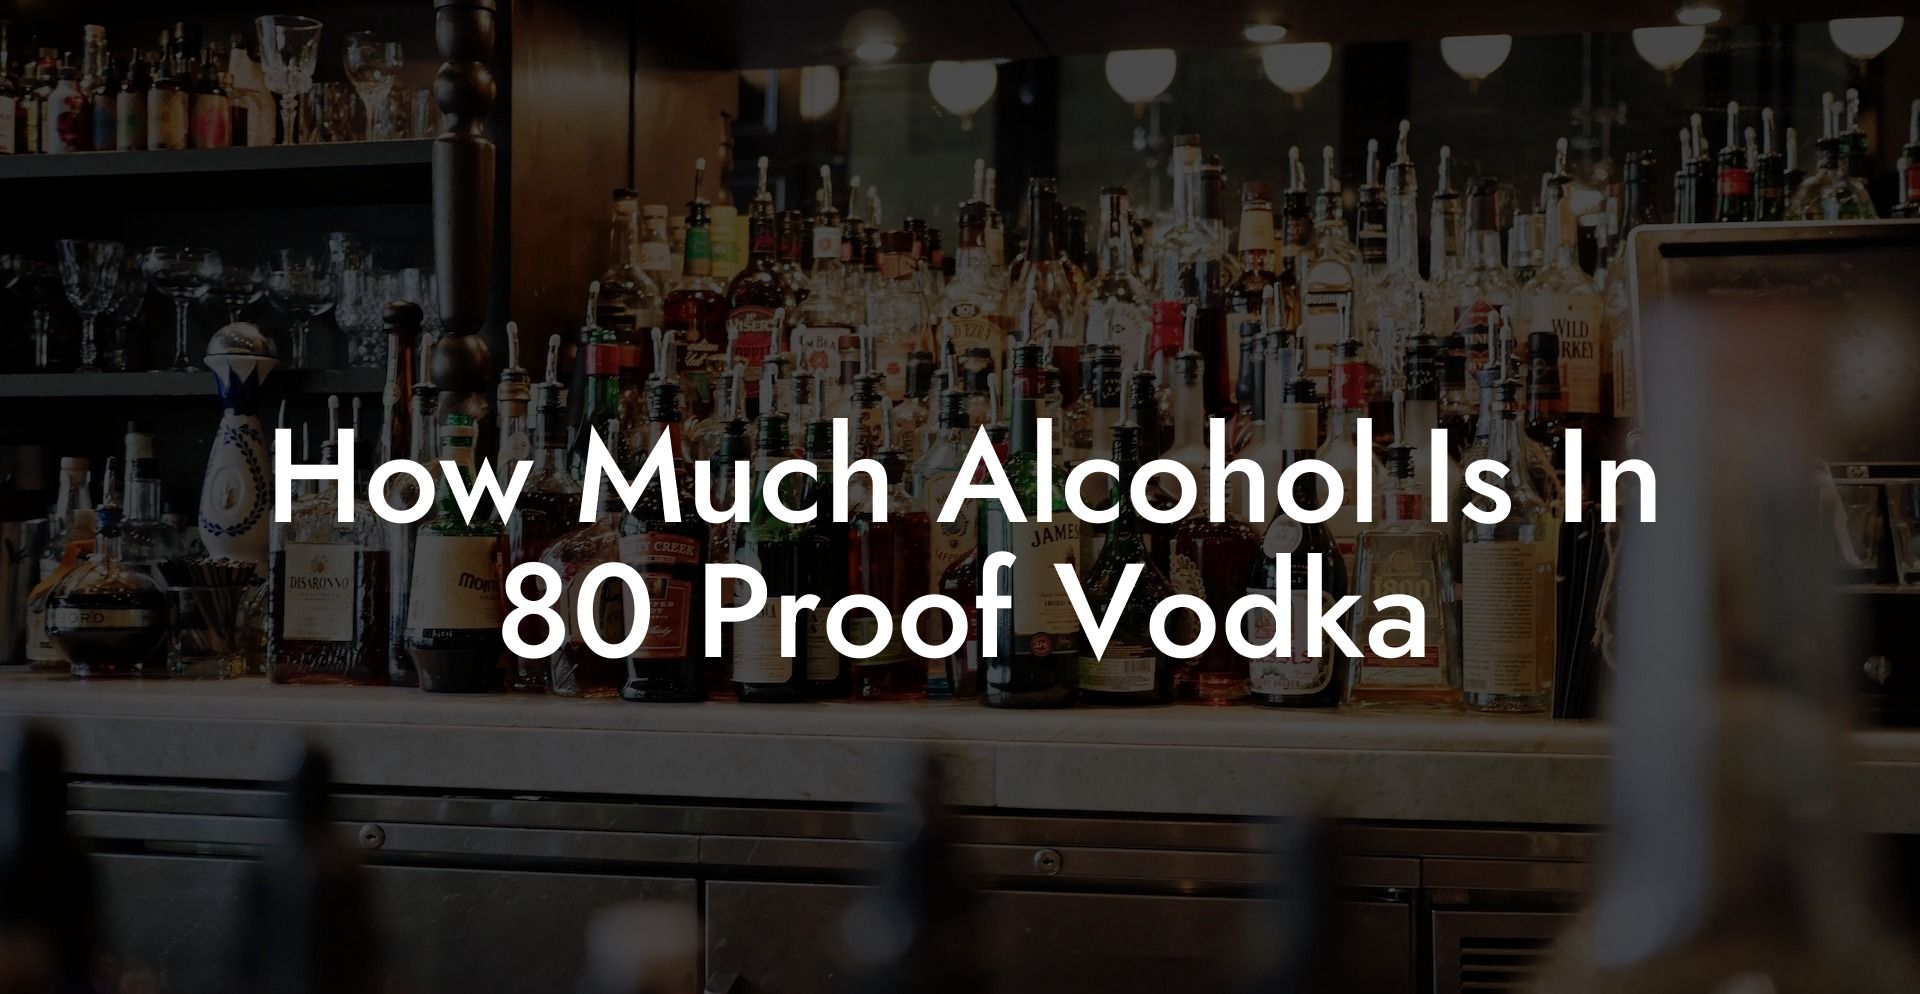 How Much Alcohol Is In 80 Proof Vodka